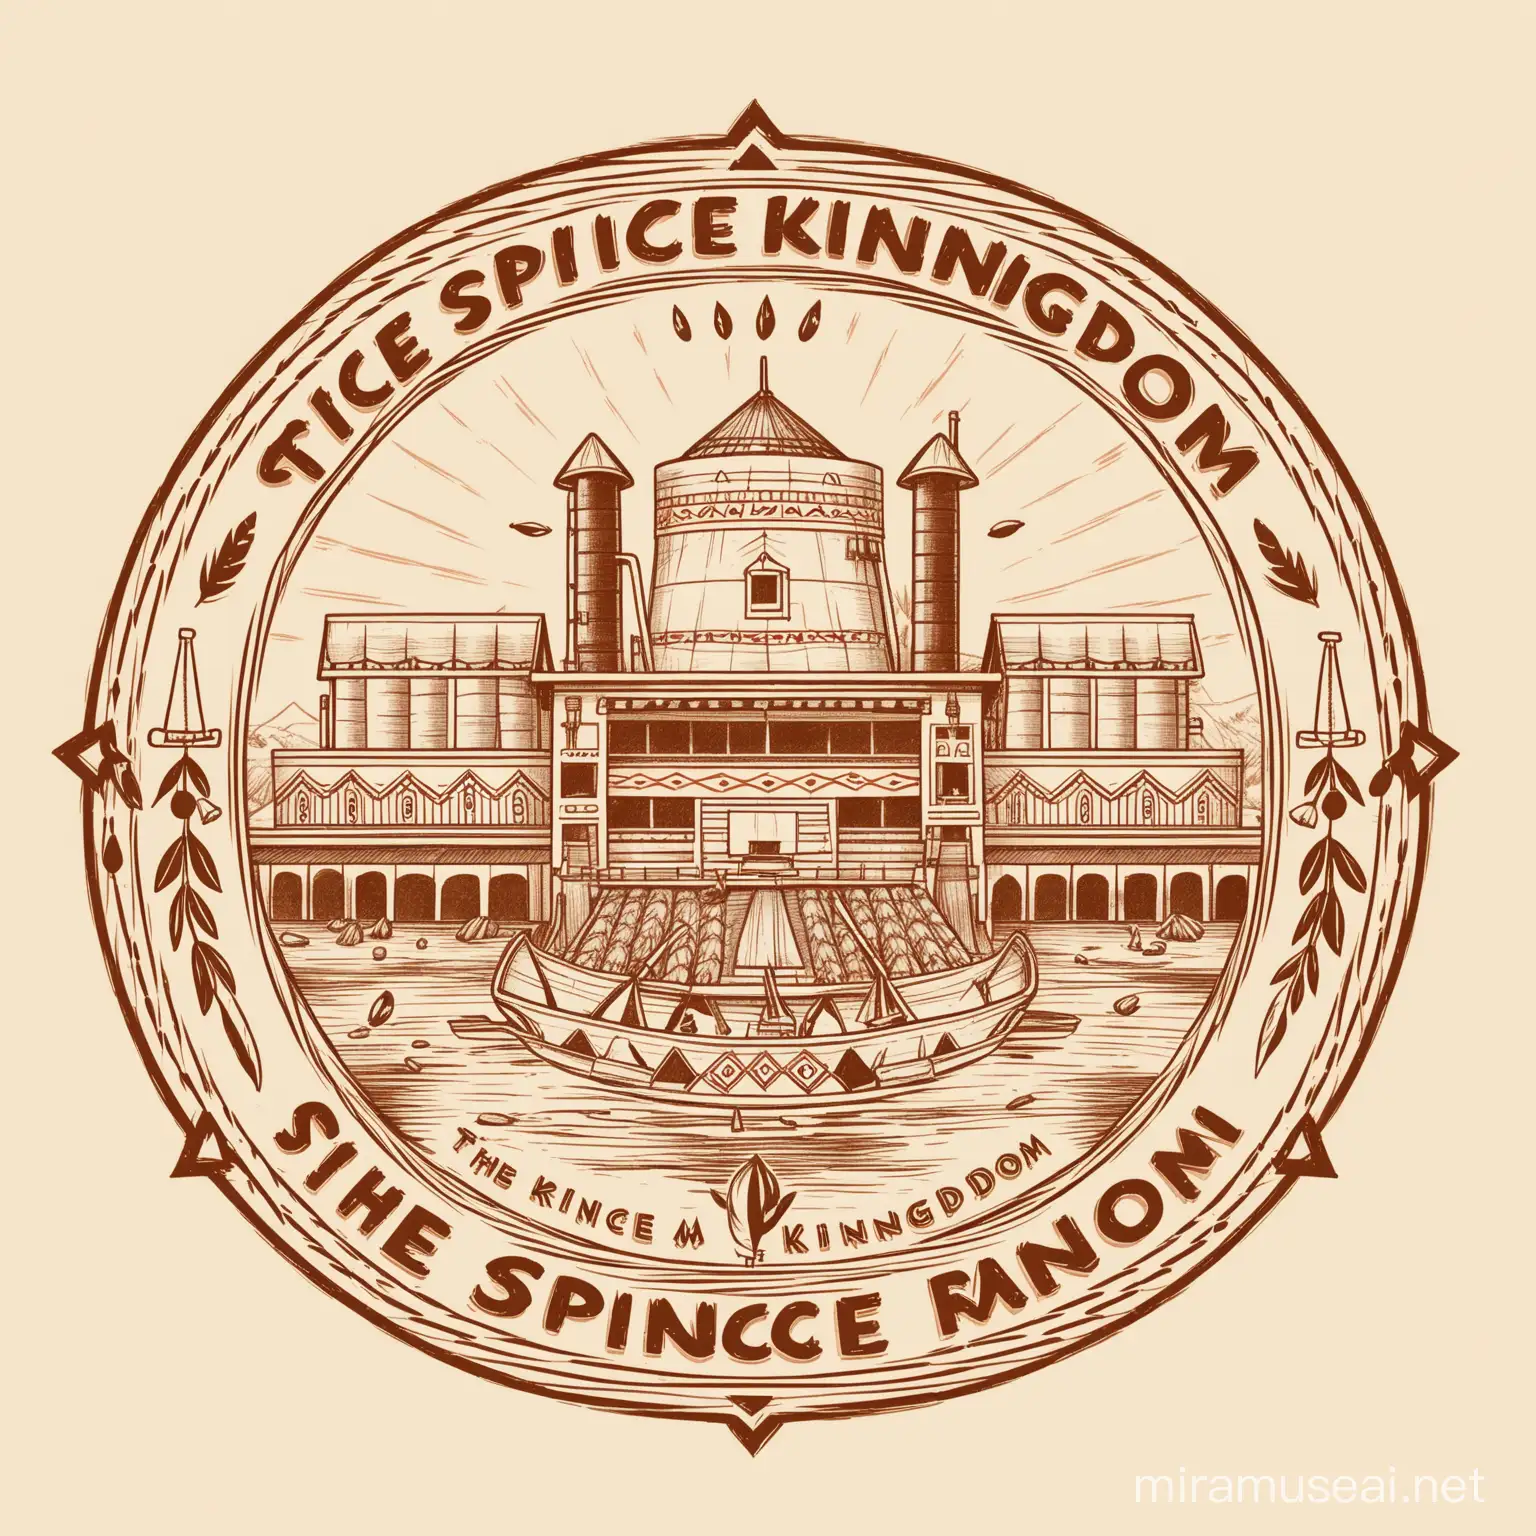 a logo for a native american  spice making factory called "The Spice Kingdom". Pencil drawn style